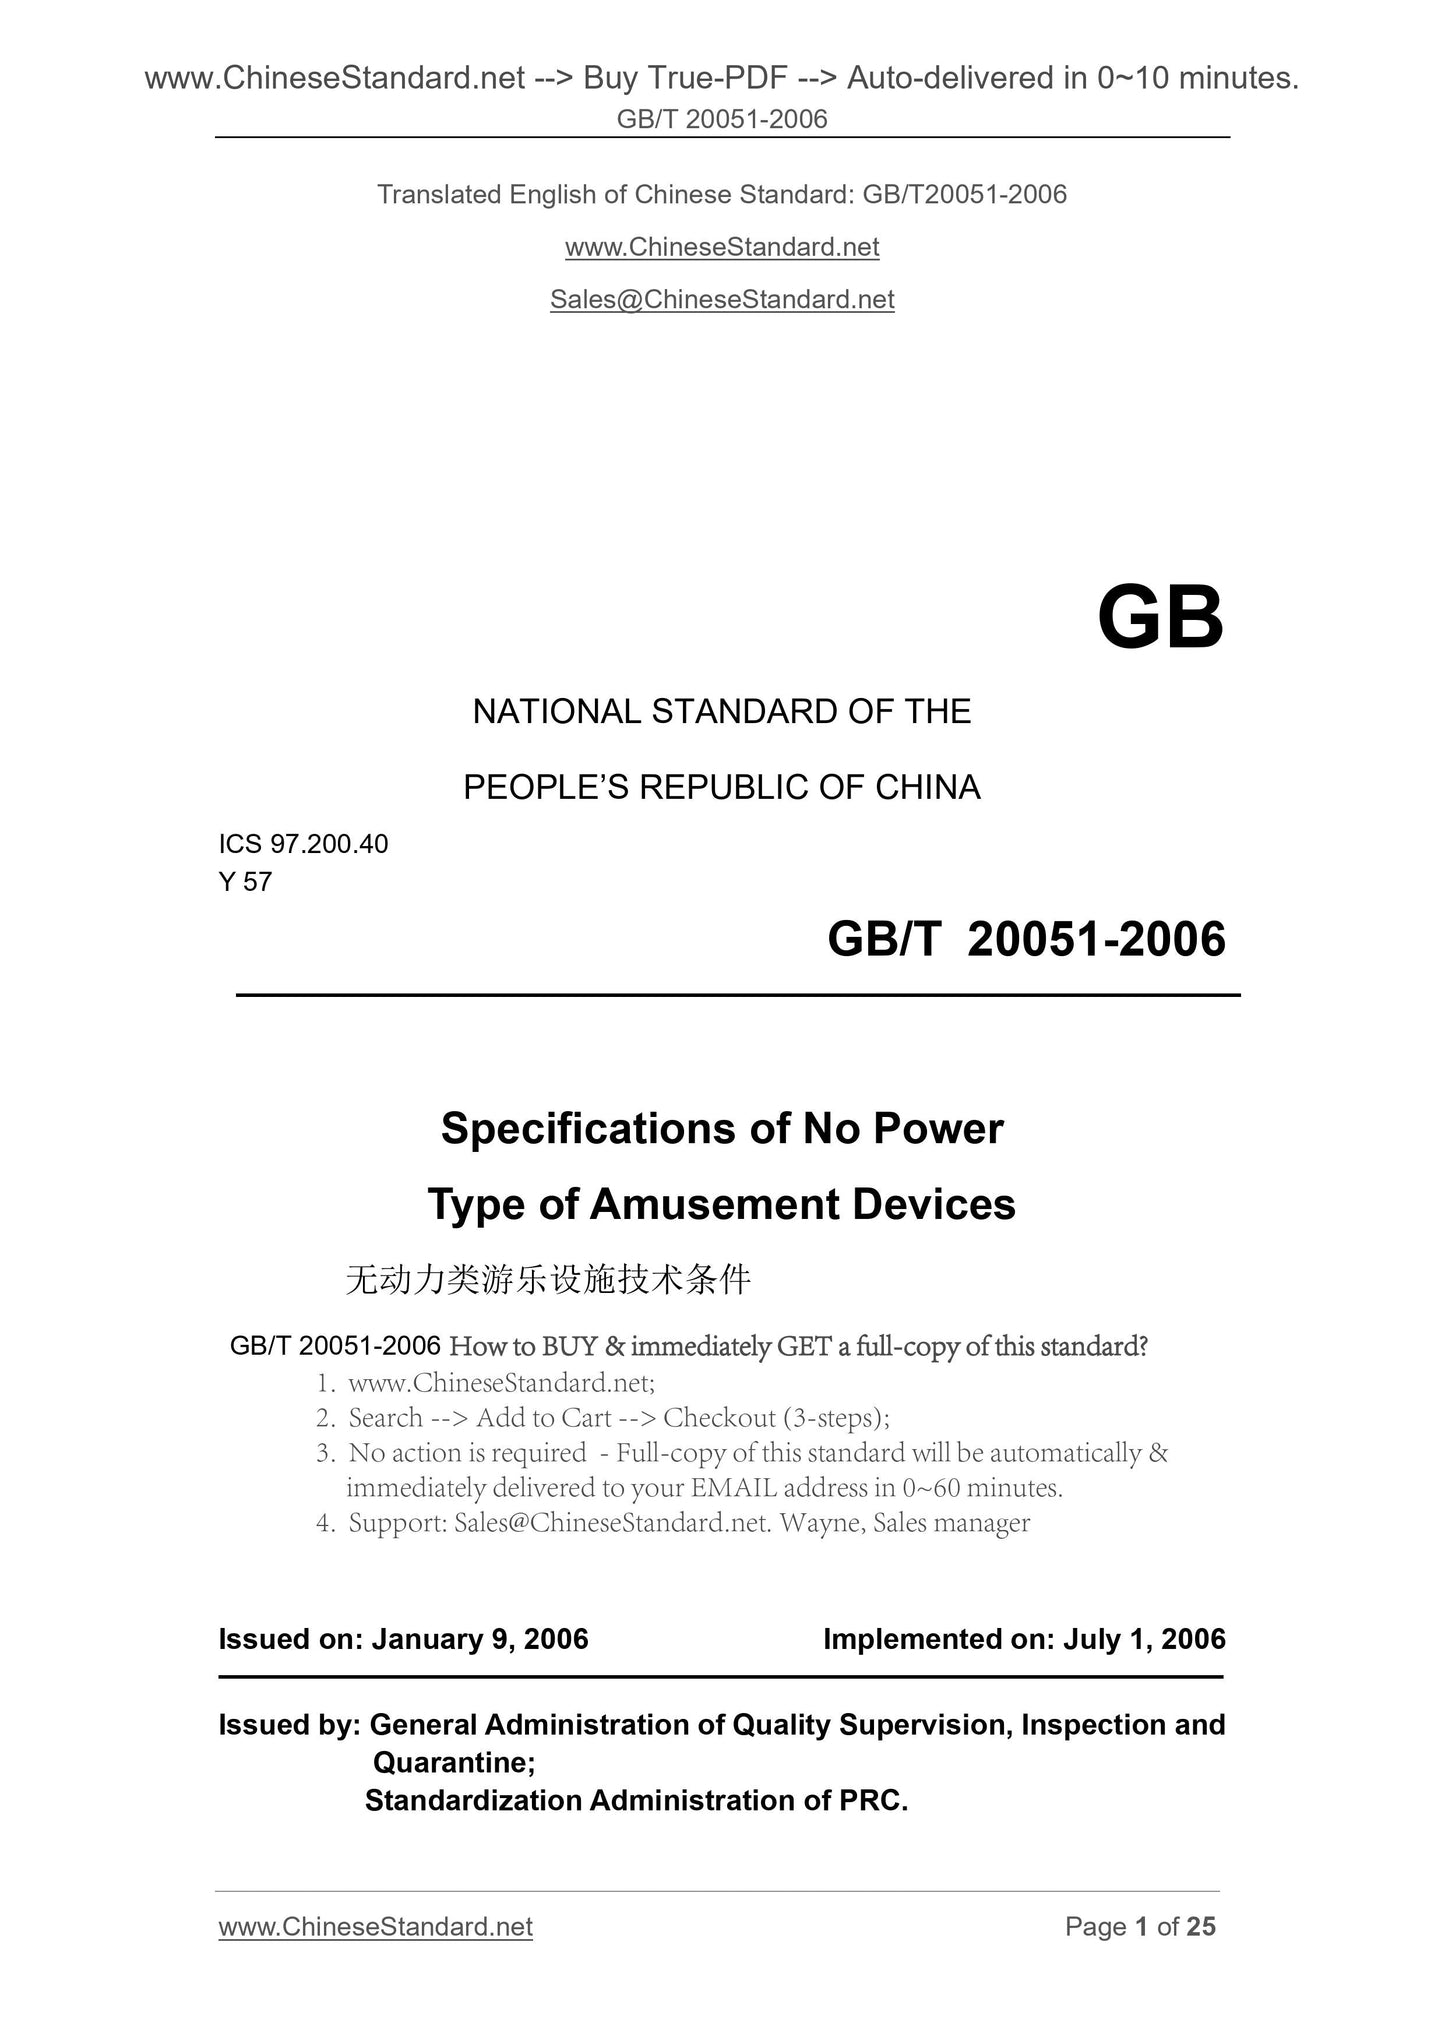 GB/T 20051-2006 Page 1